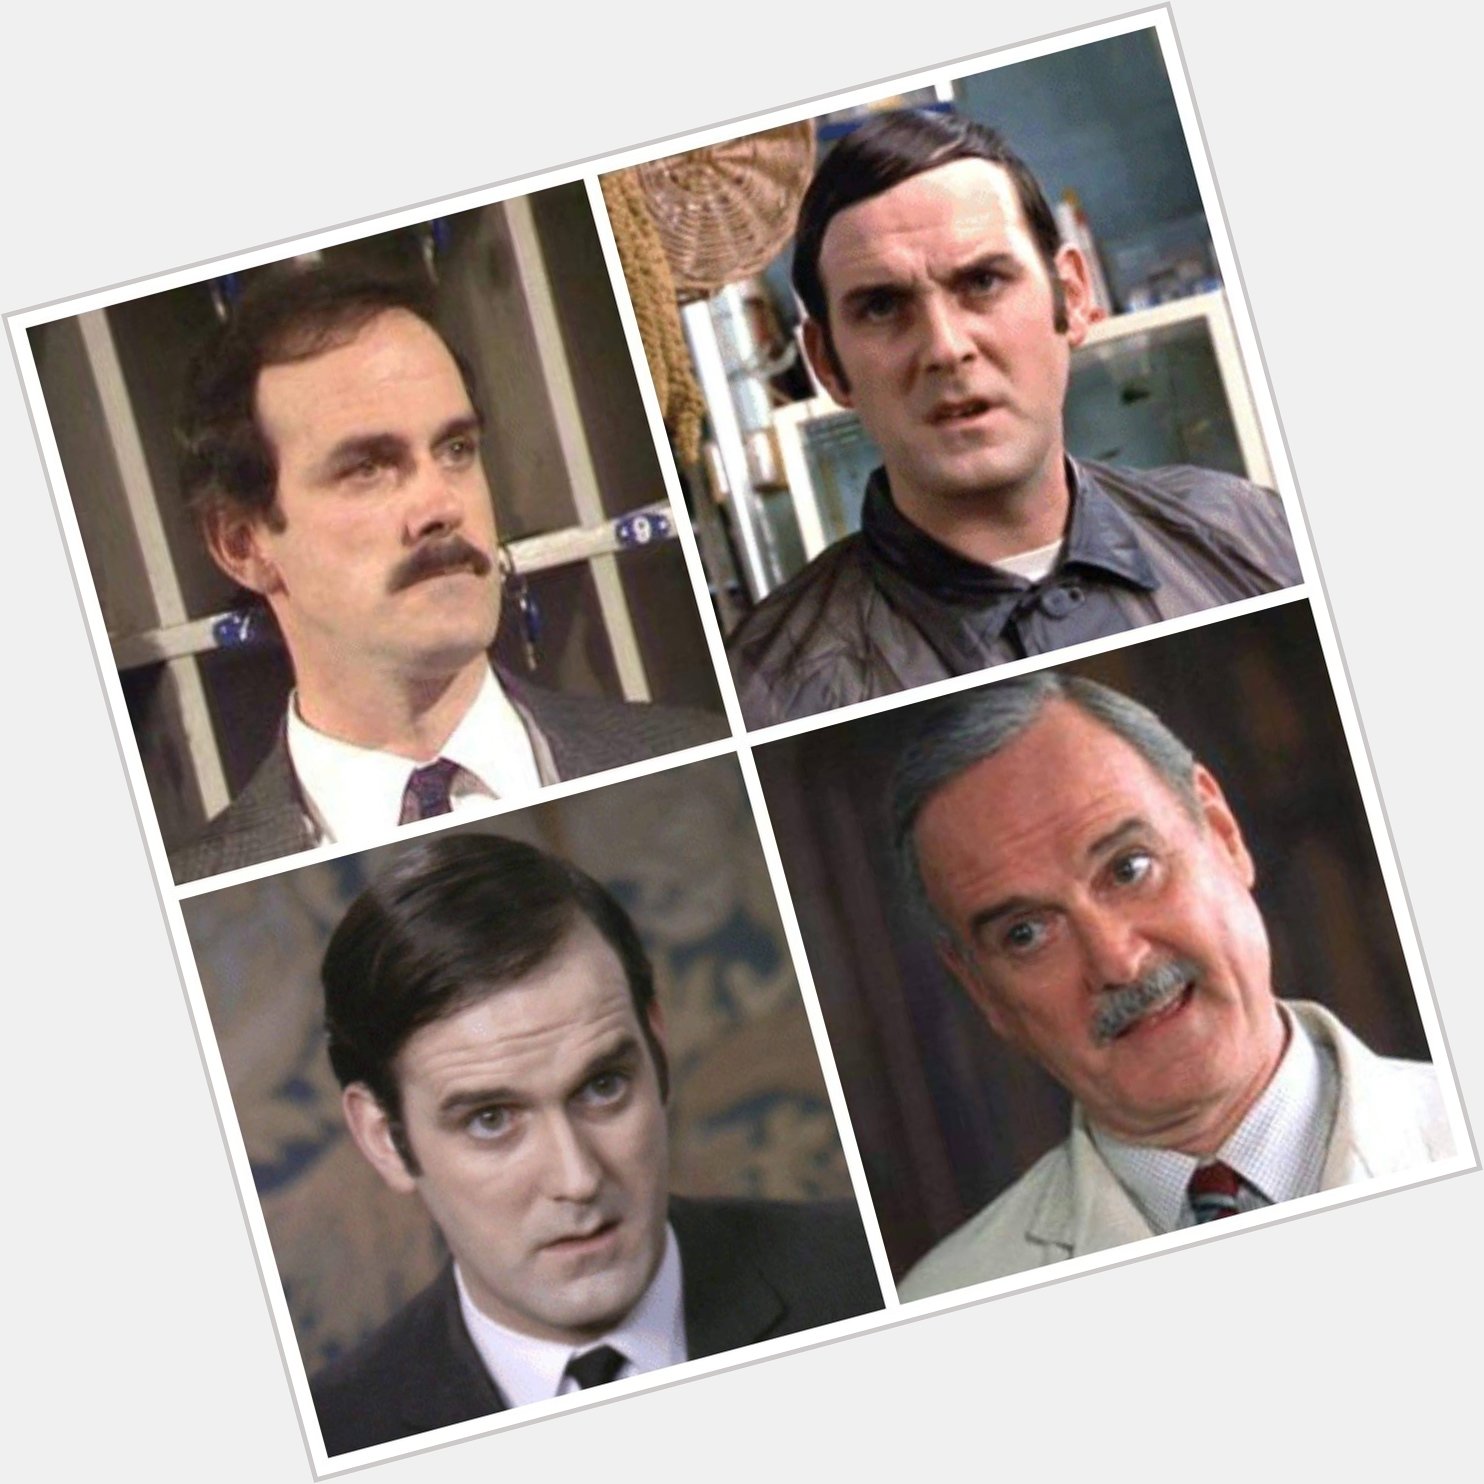 Happy 80th birthday John Cleese! The icon and comedy legend! 